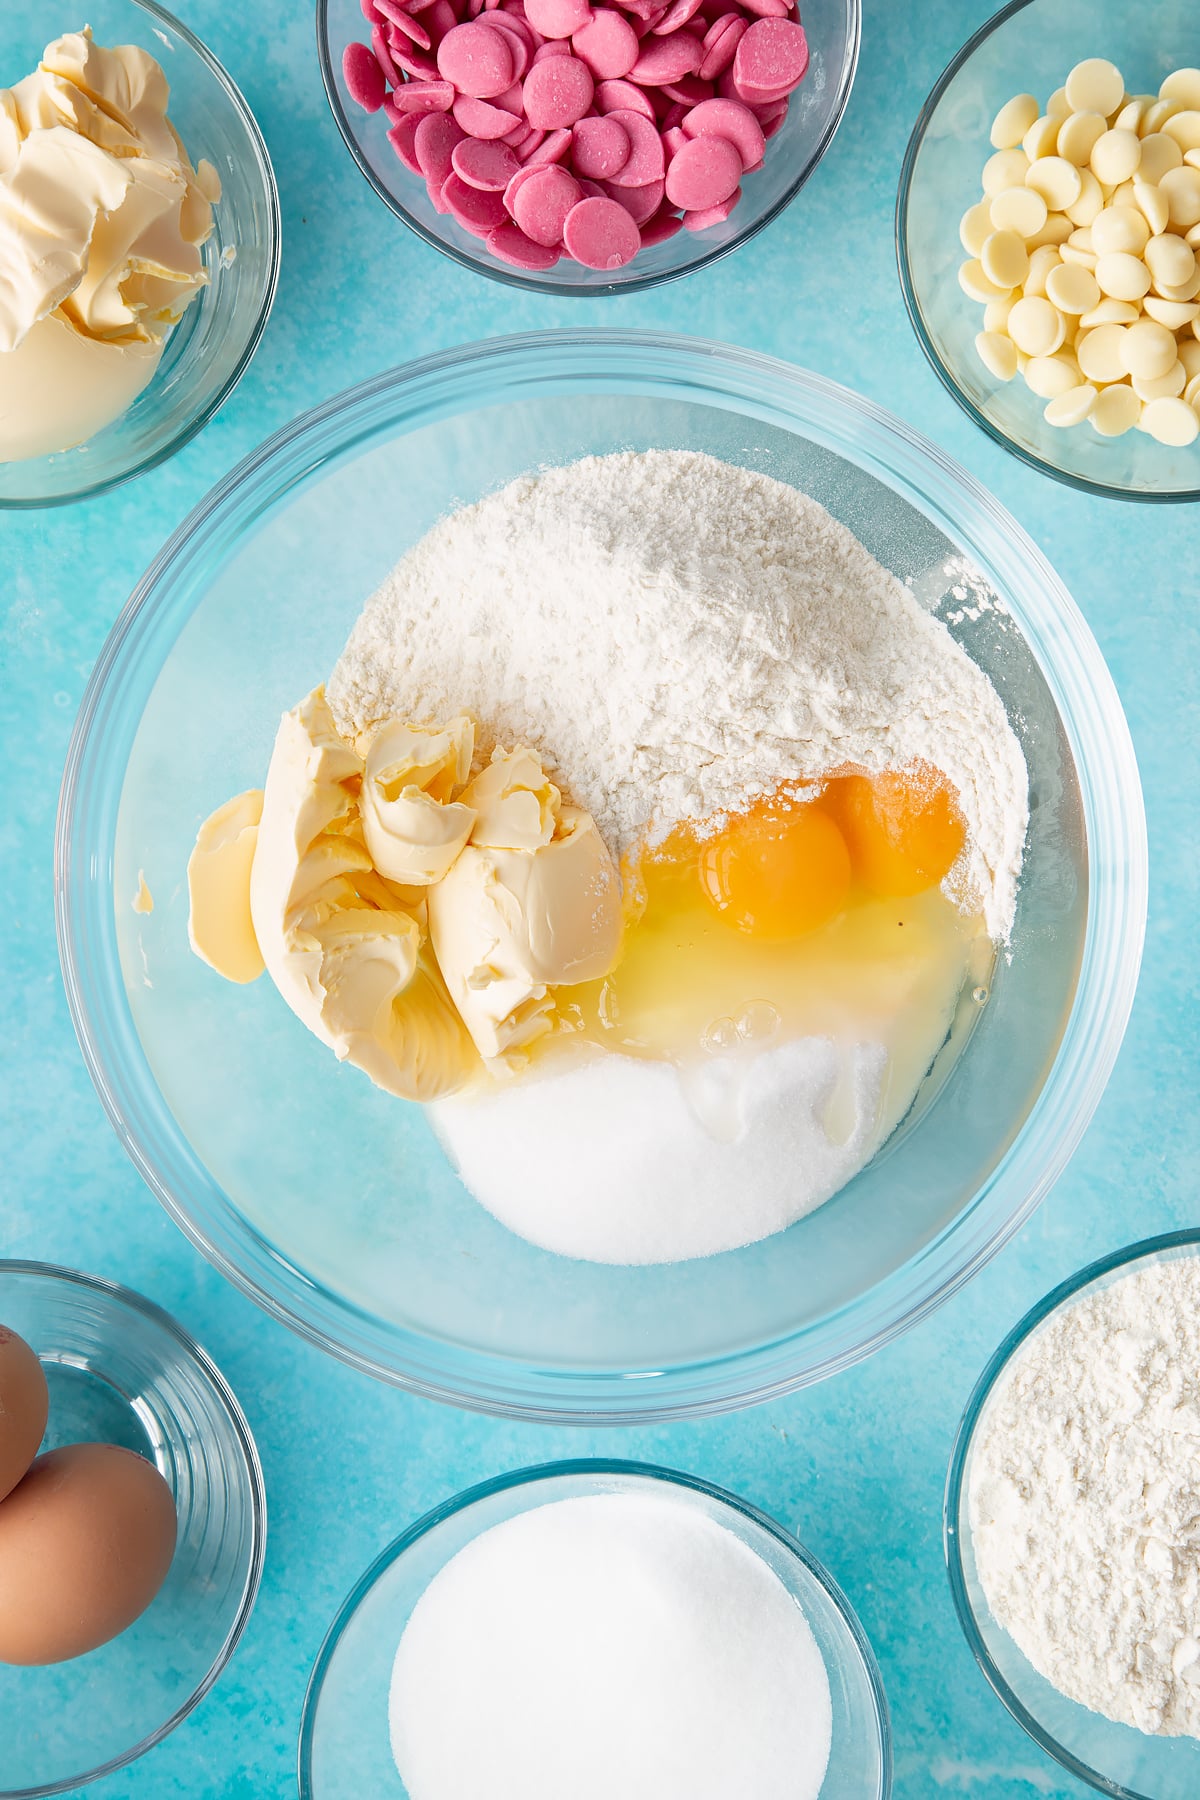 margarine, sugar, eggs and flour in a large clear bowl surrounded bu ingredients.